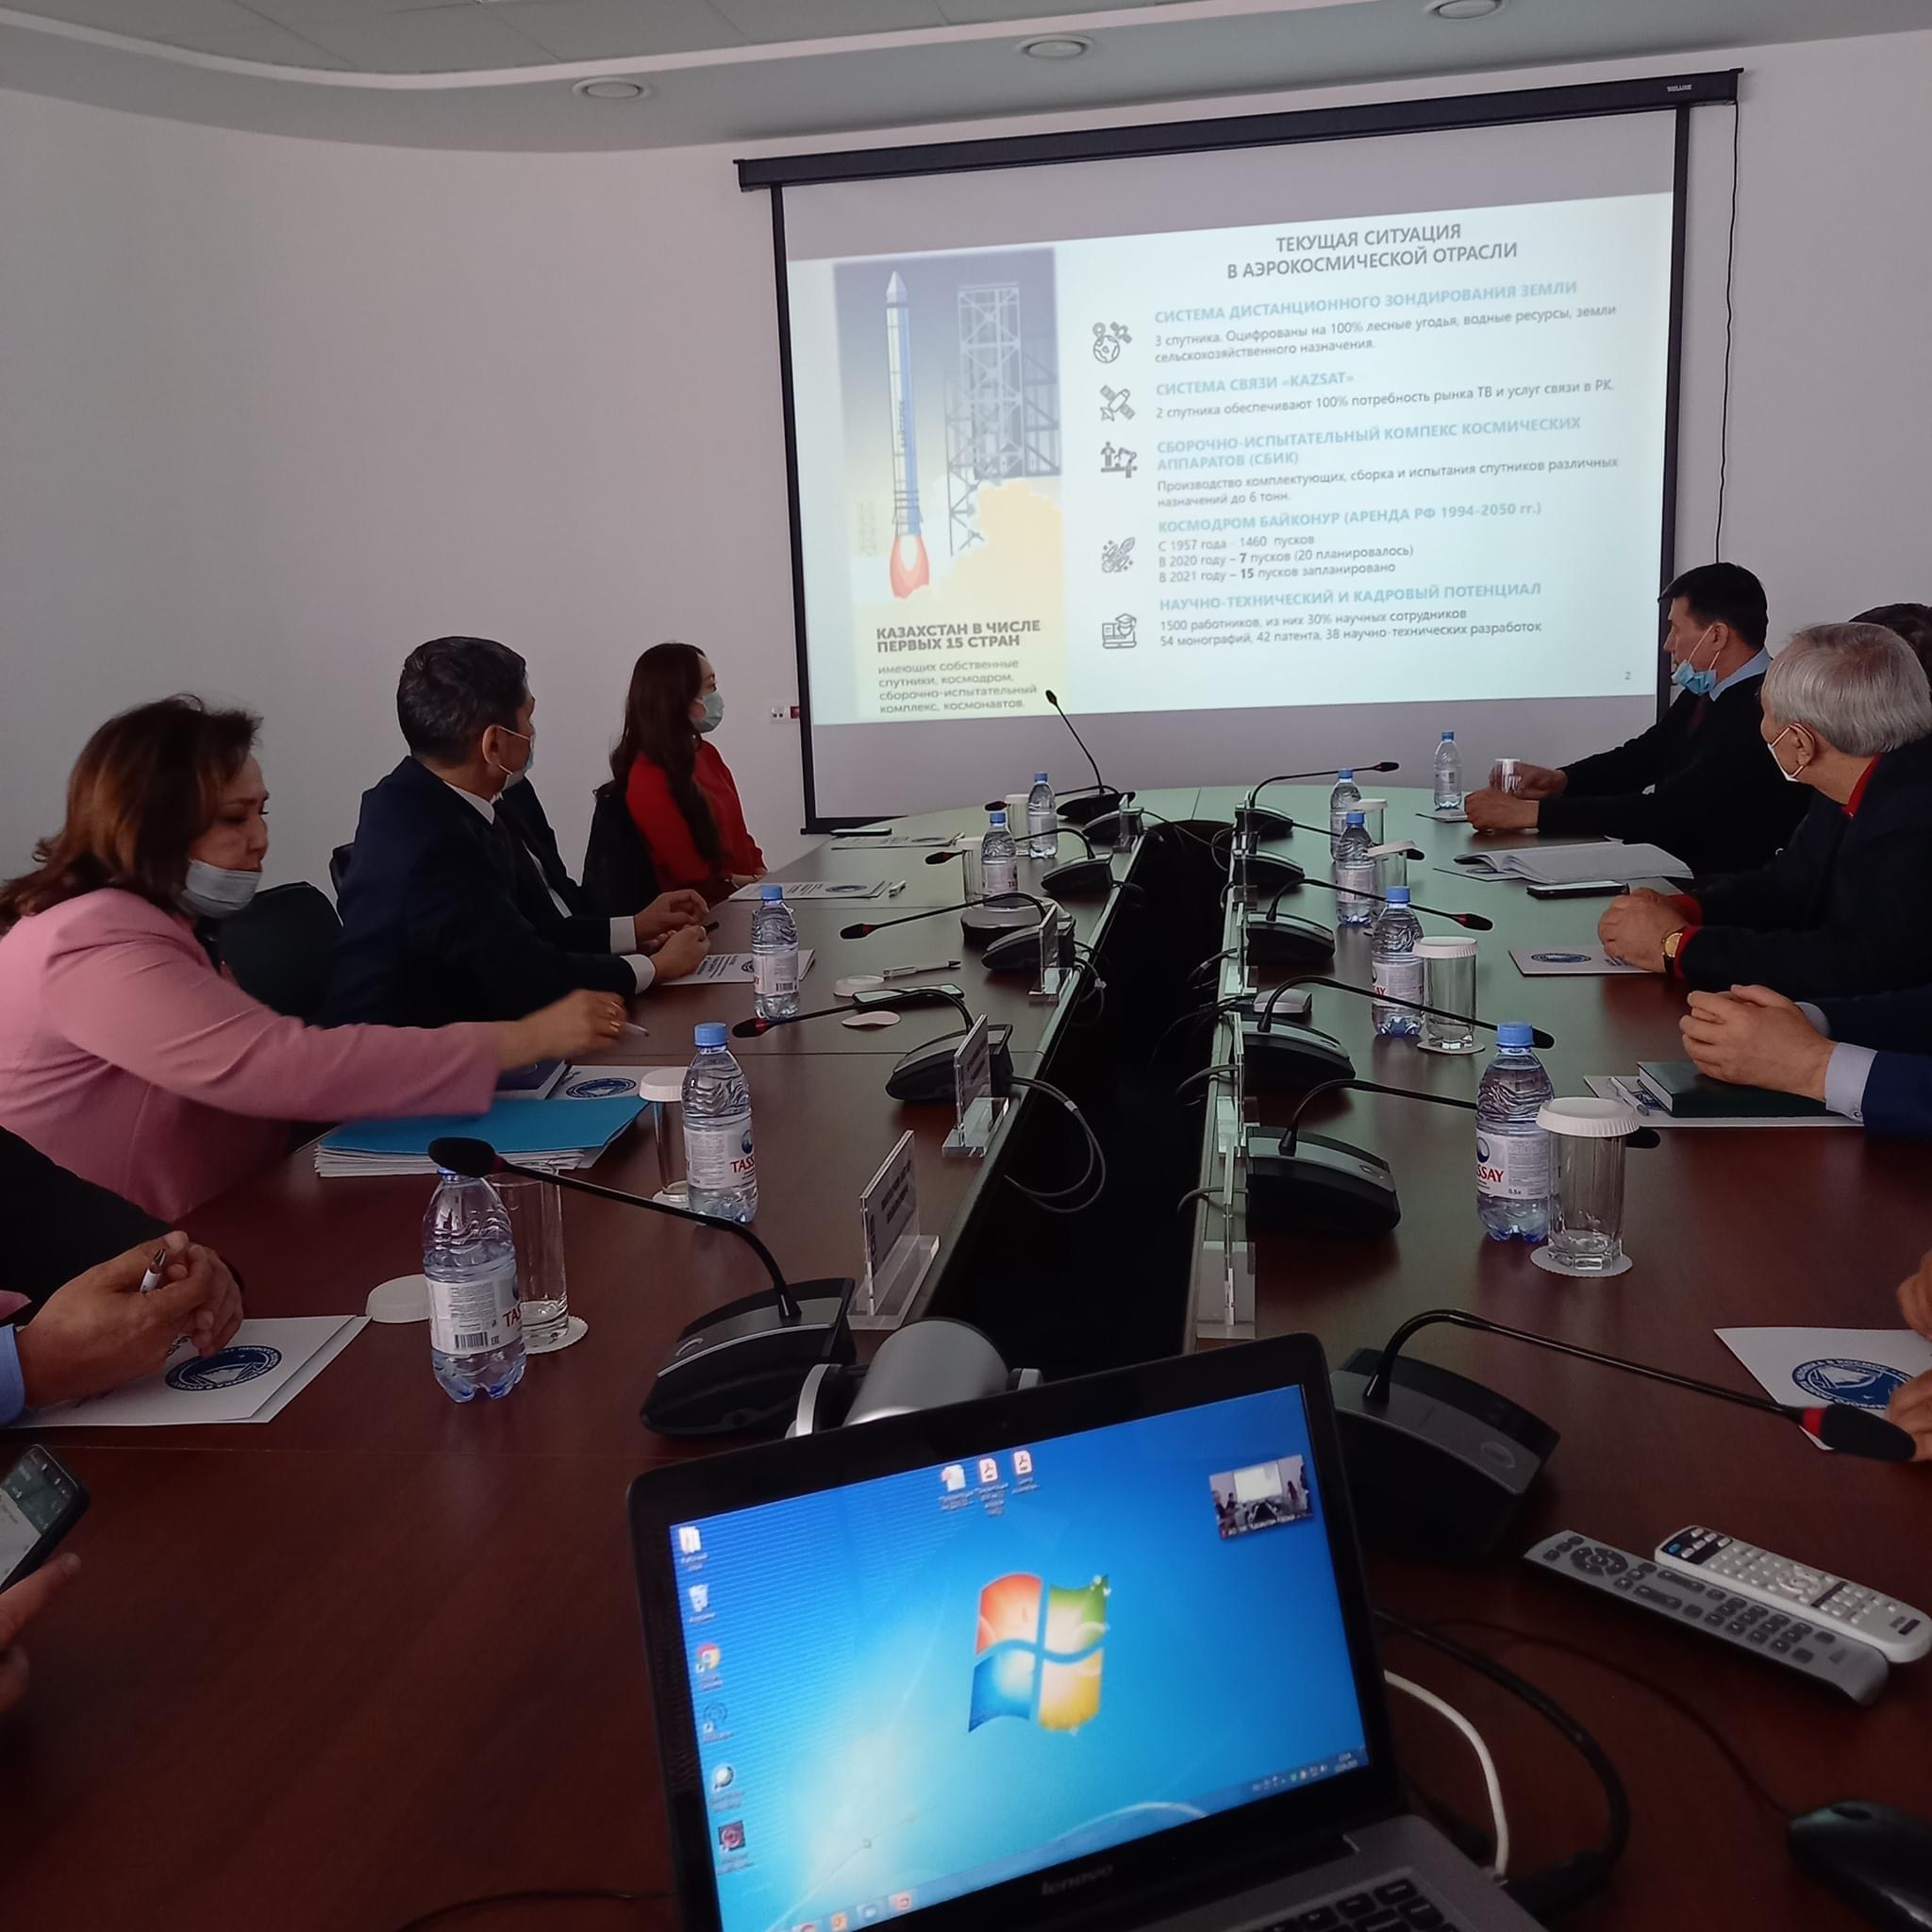 Agrarians of Kazakhstan were told about space monitoring of agricultural land